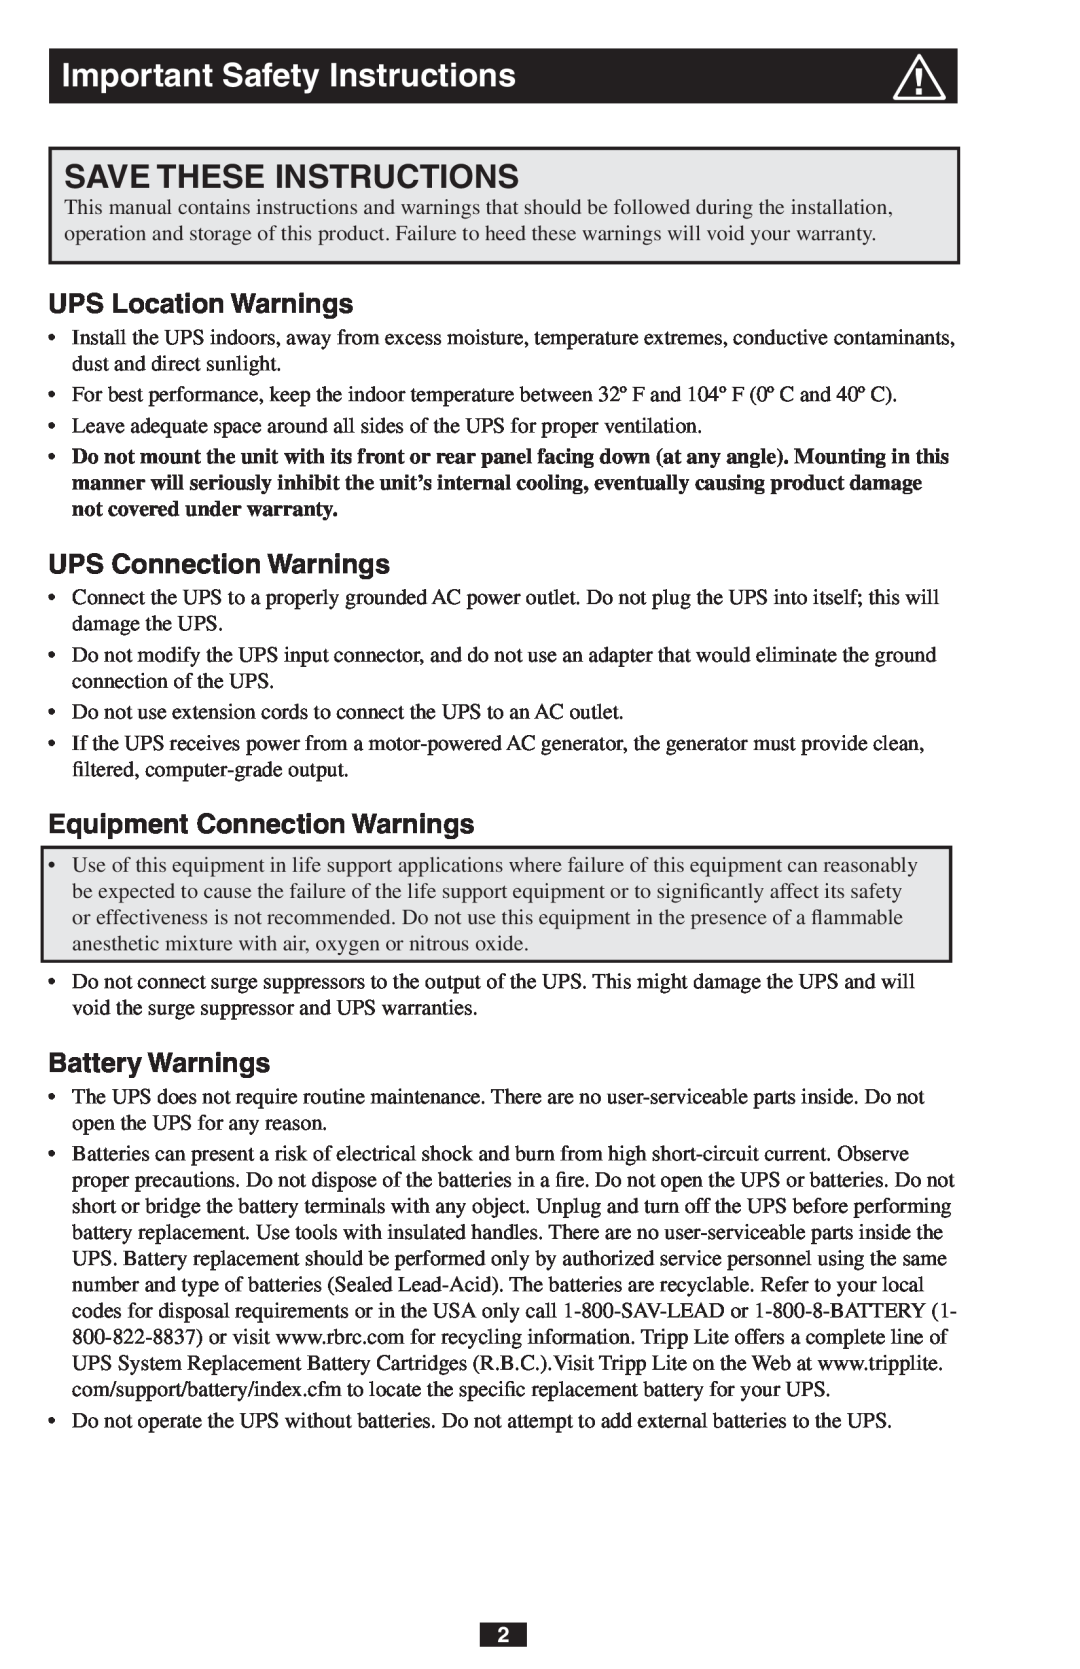 Tripp Lite PRO550 Important Safety Instructions, Save These Instructions, UPS Location Warnings, UPS Connection Warnings 